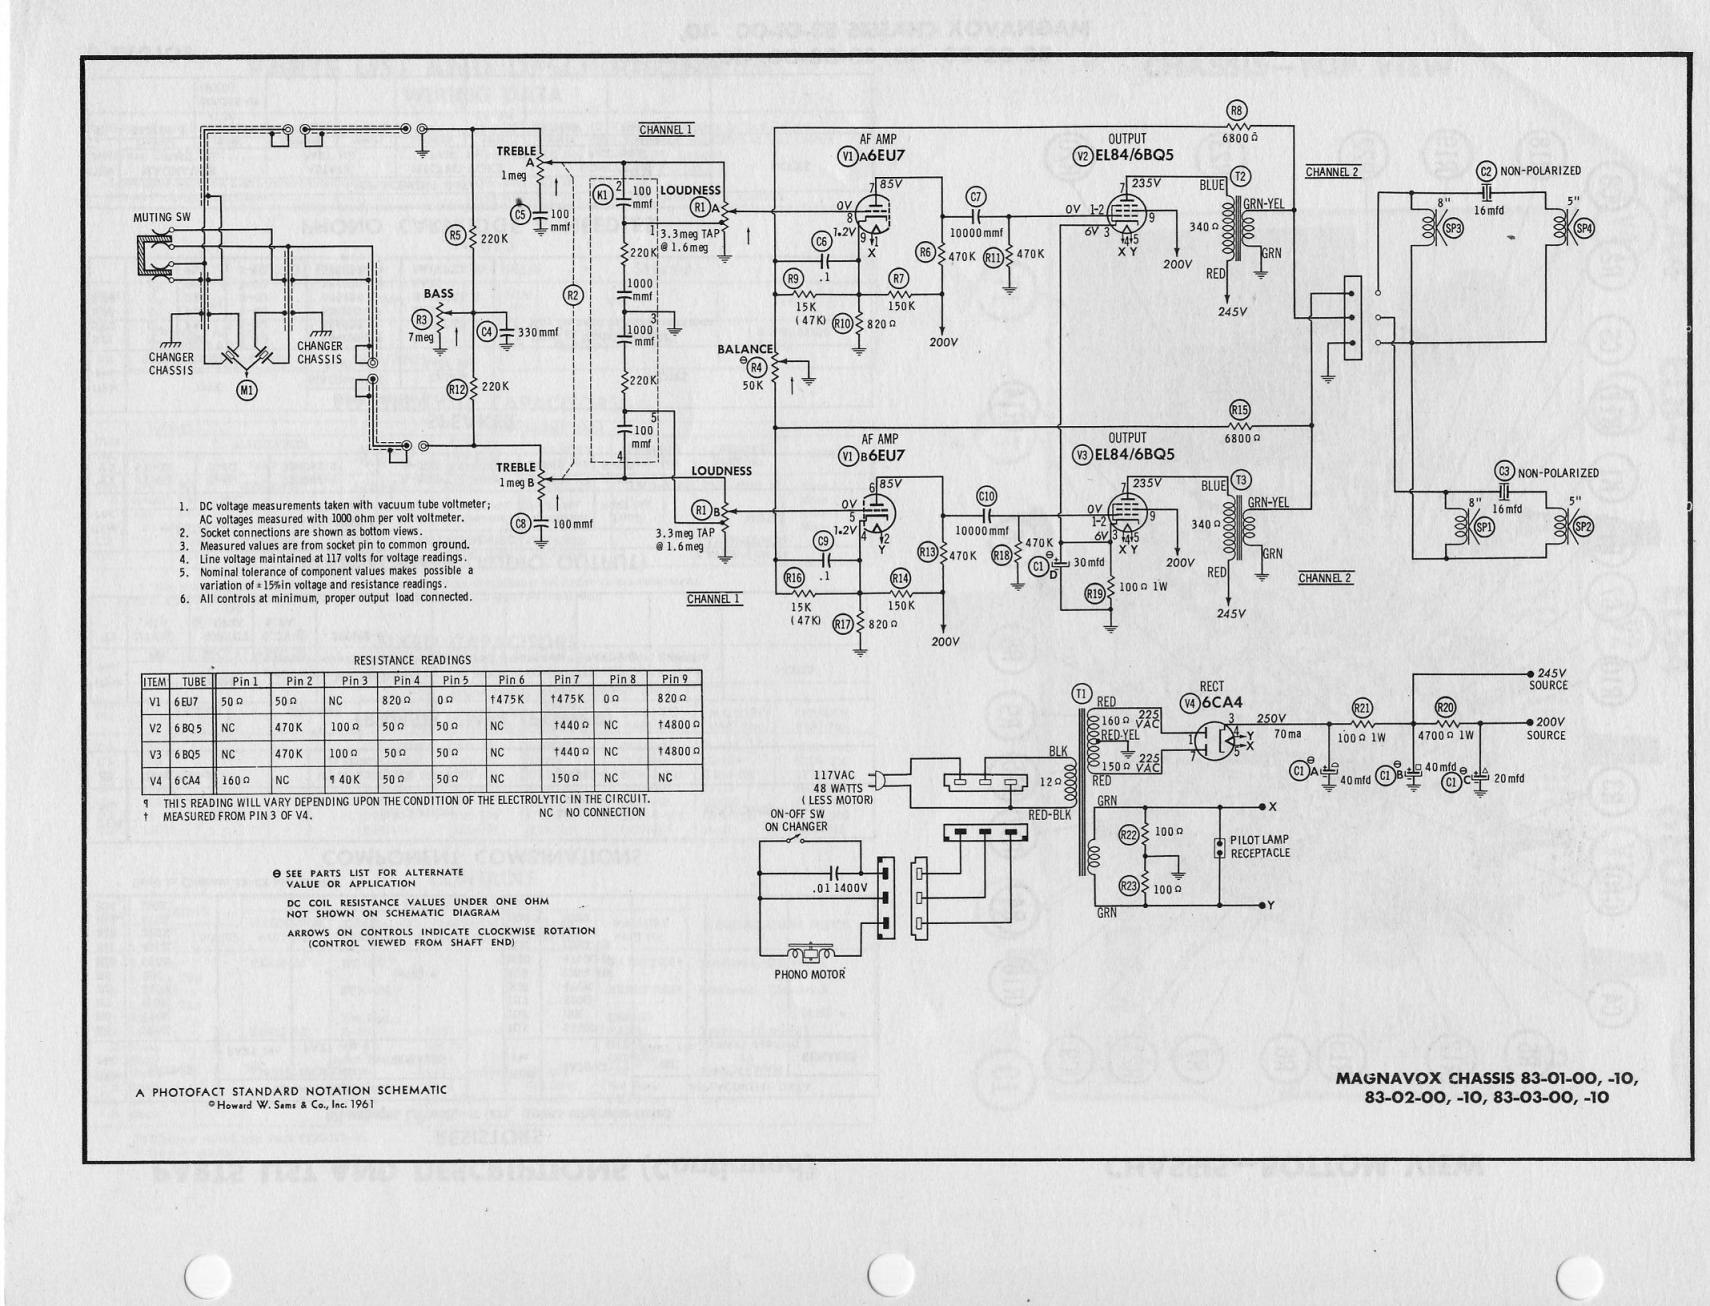 Here's the Sam's schematic of the 6EU7 input with a 6CA4